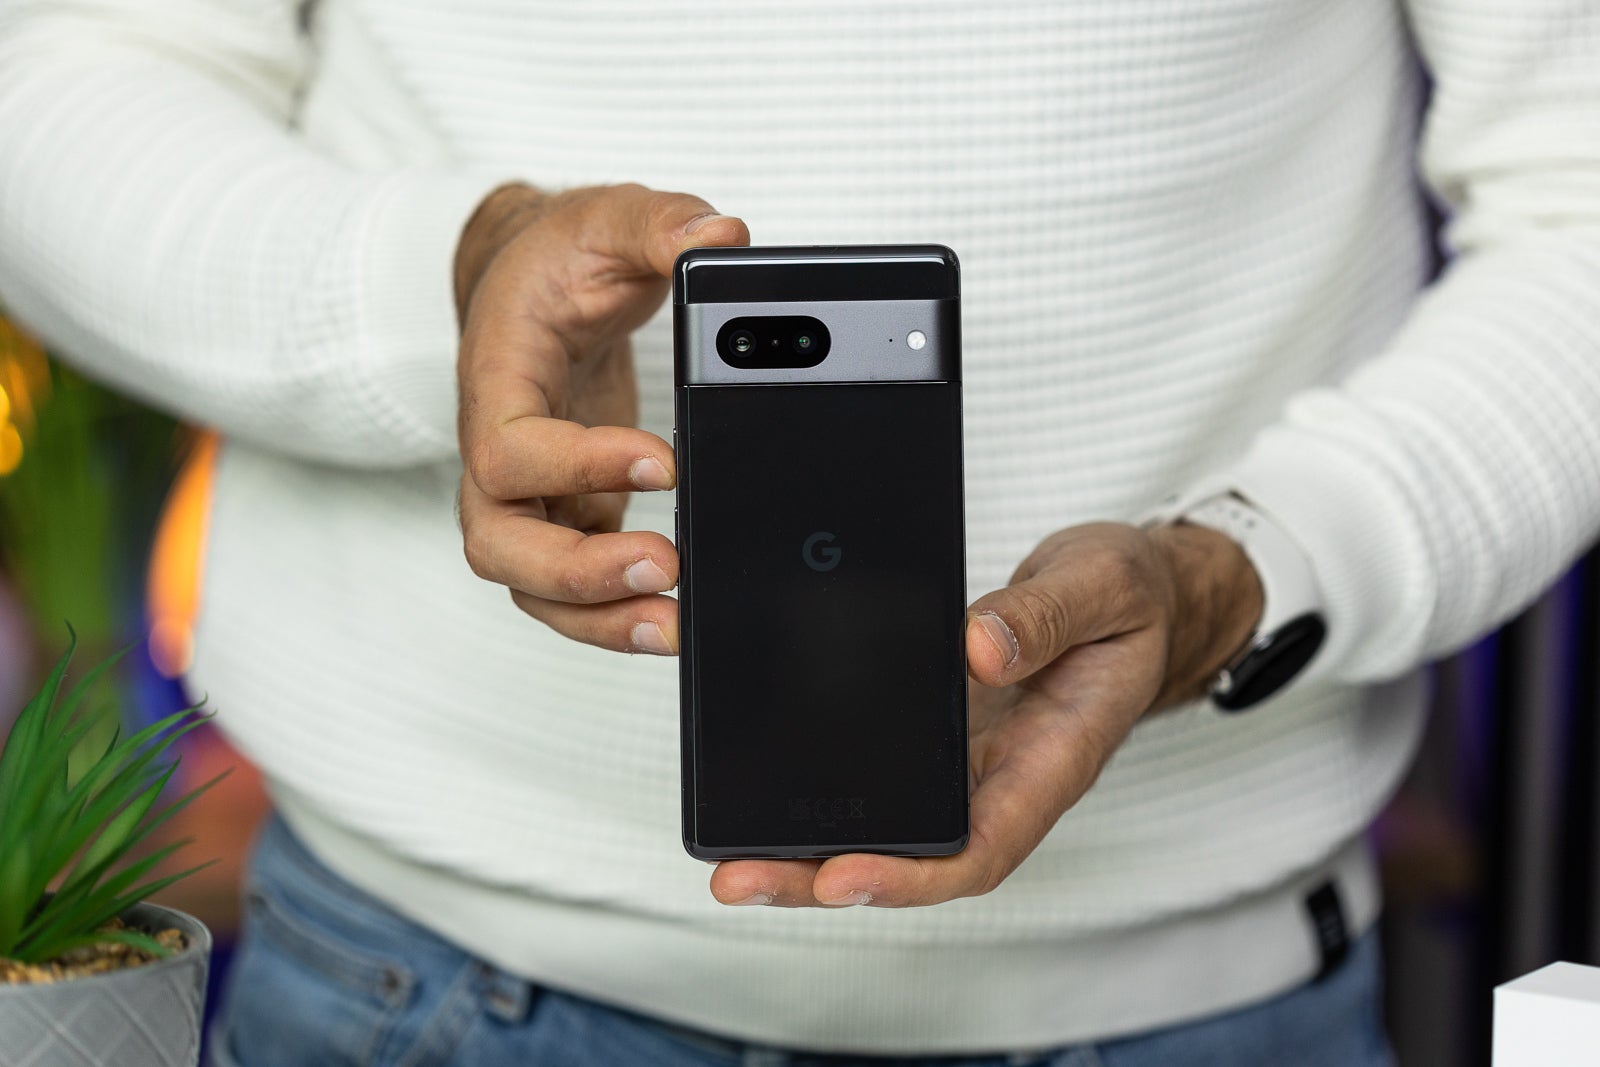 Image credit — PhoneArena - I love my Pixel. So why is it so hard to convince others to get one?